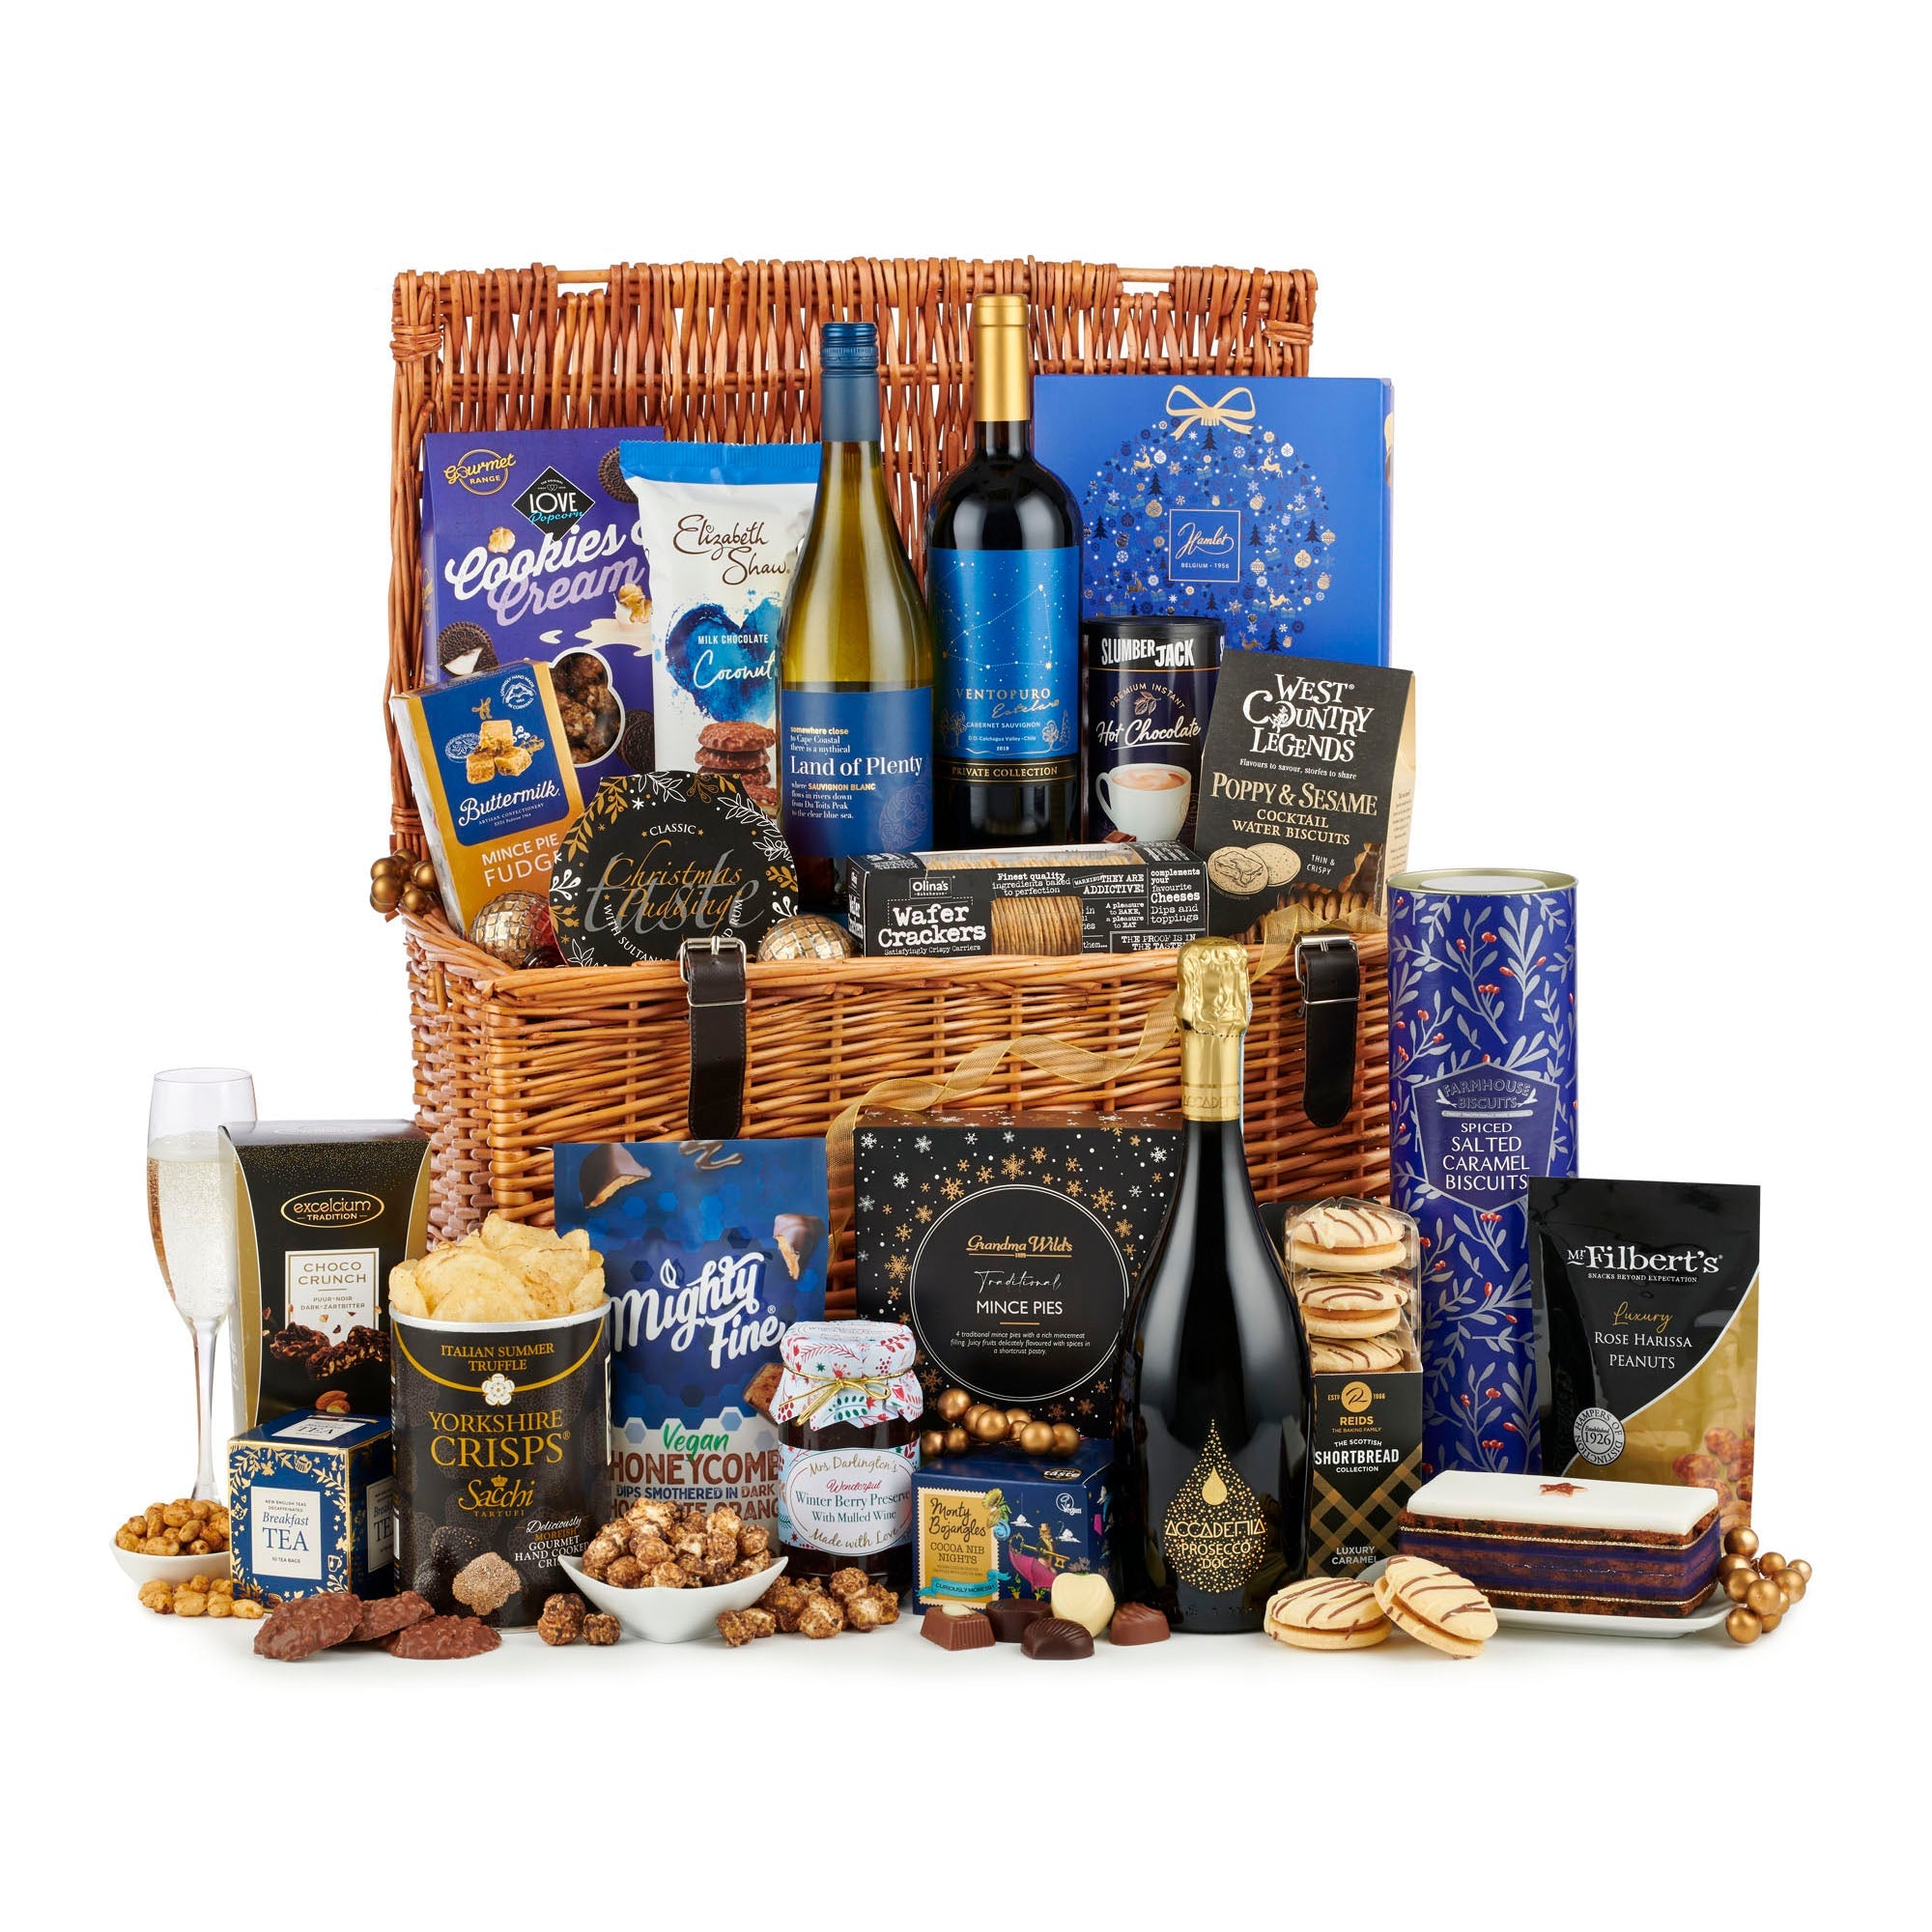 The Excelsior Luxury Christmas Hamper